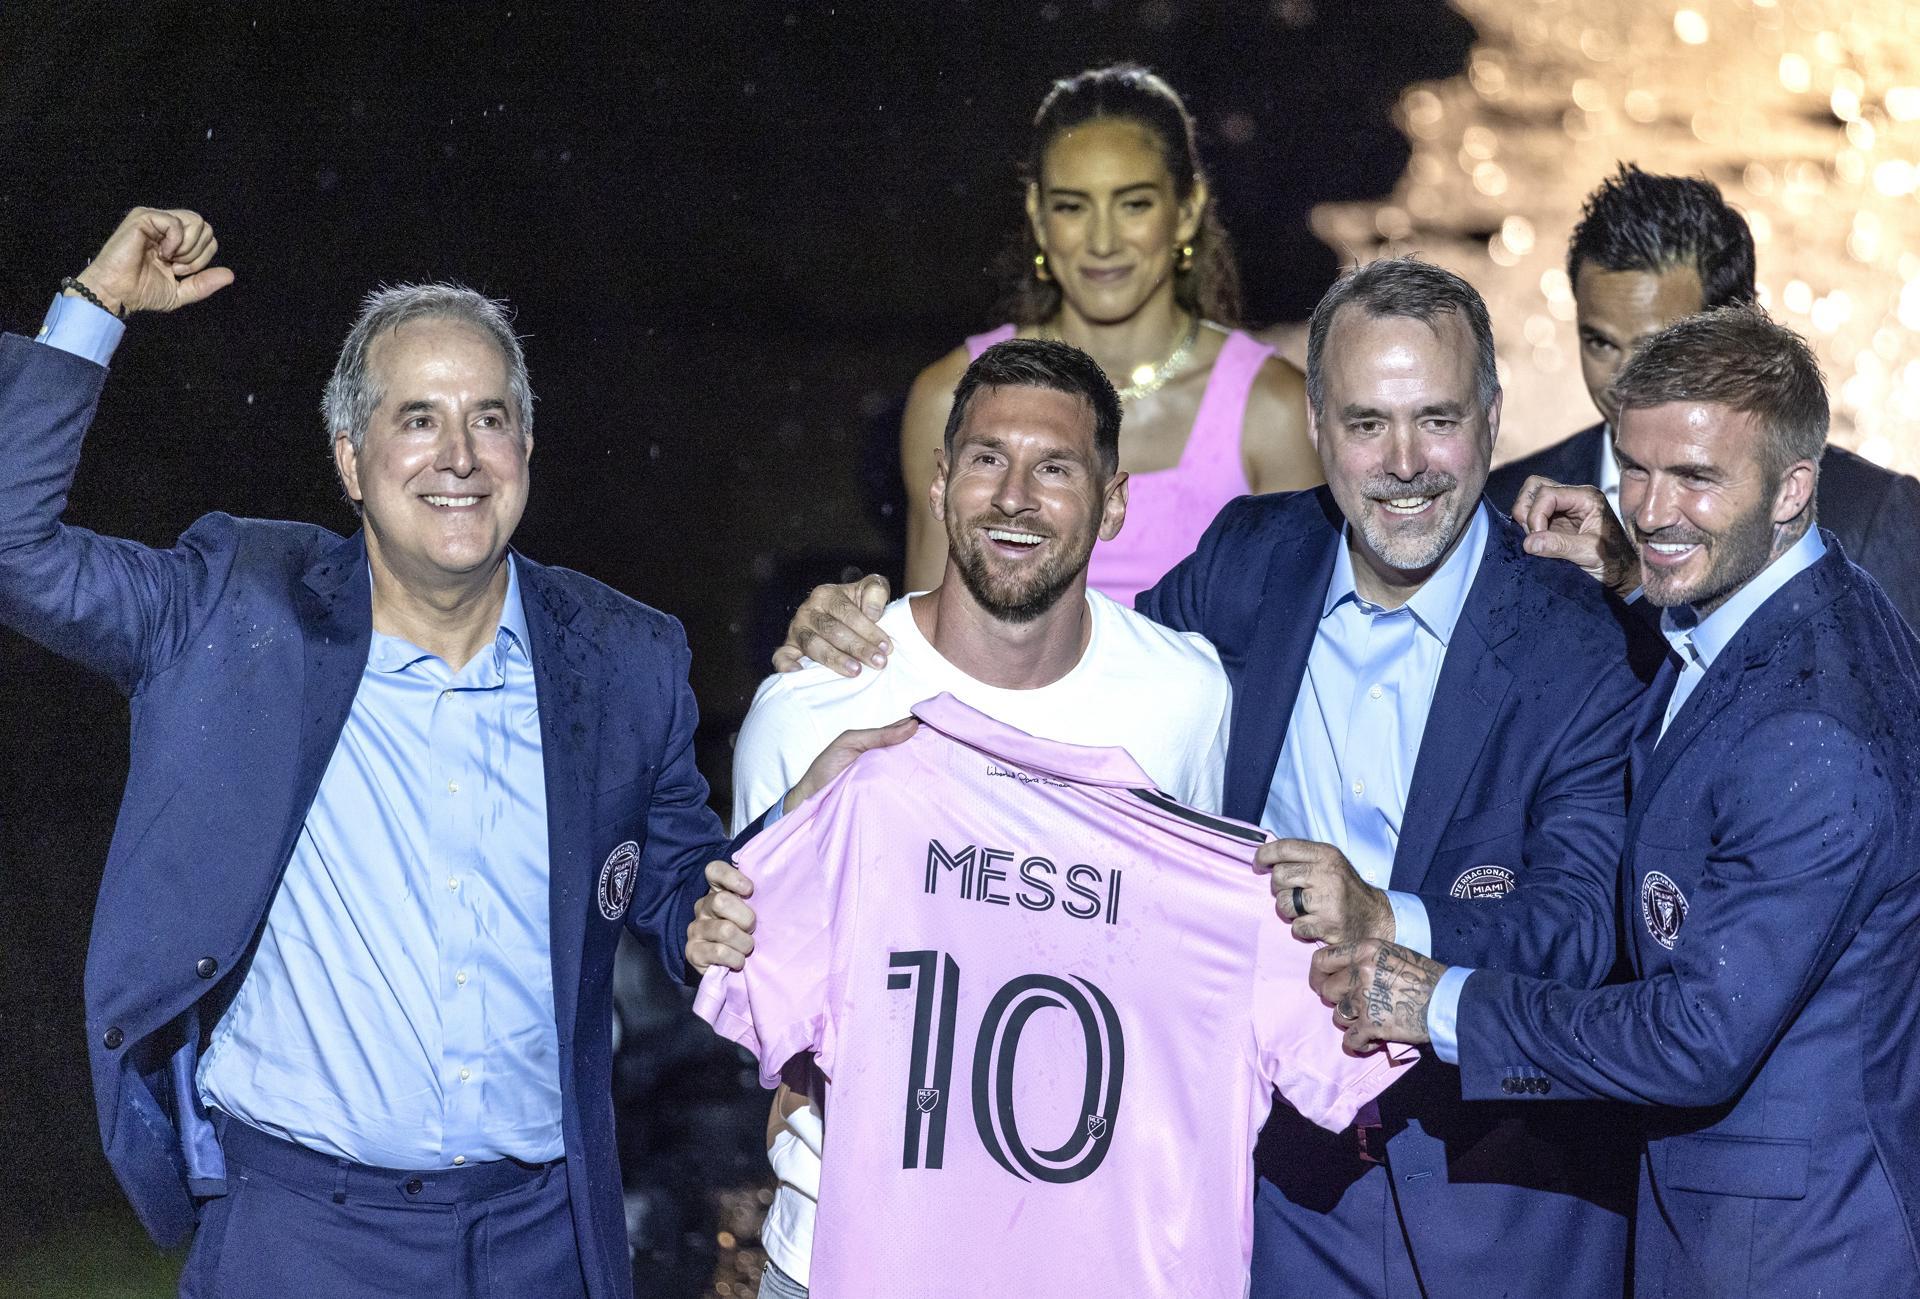 Messi in Miami "I am very happy to have chosen this project